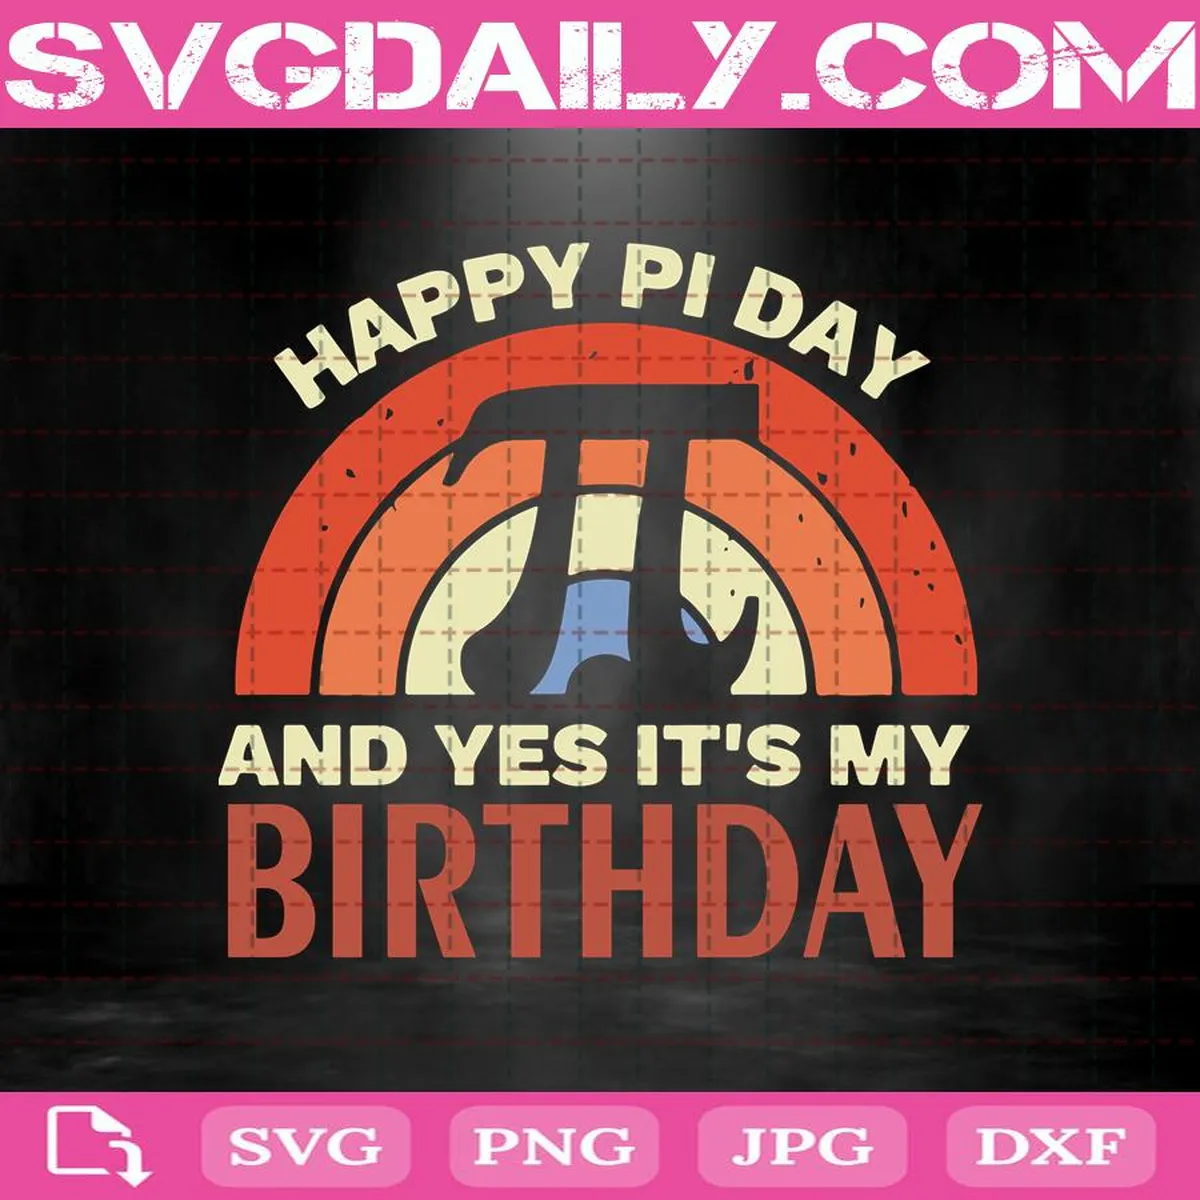 Happy Pi Day And Yes It's Is My Birthday Svg, Pi Day Svg, Happy Pi Day Svg, Birthday Of Pi Svg, Pi Birthday Svg, Pi Math Svg